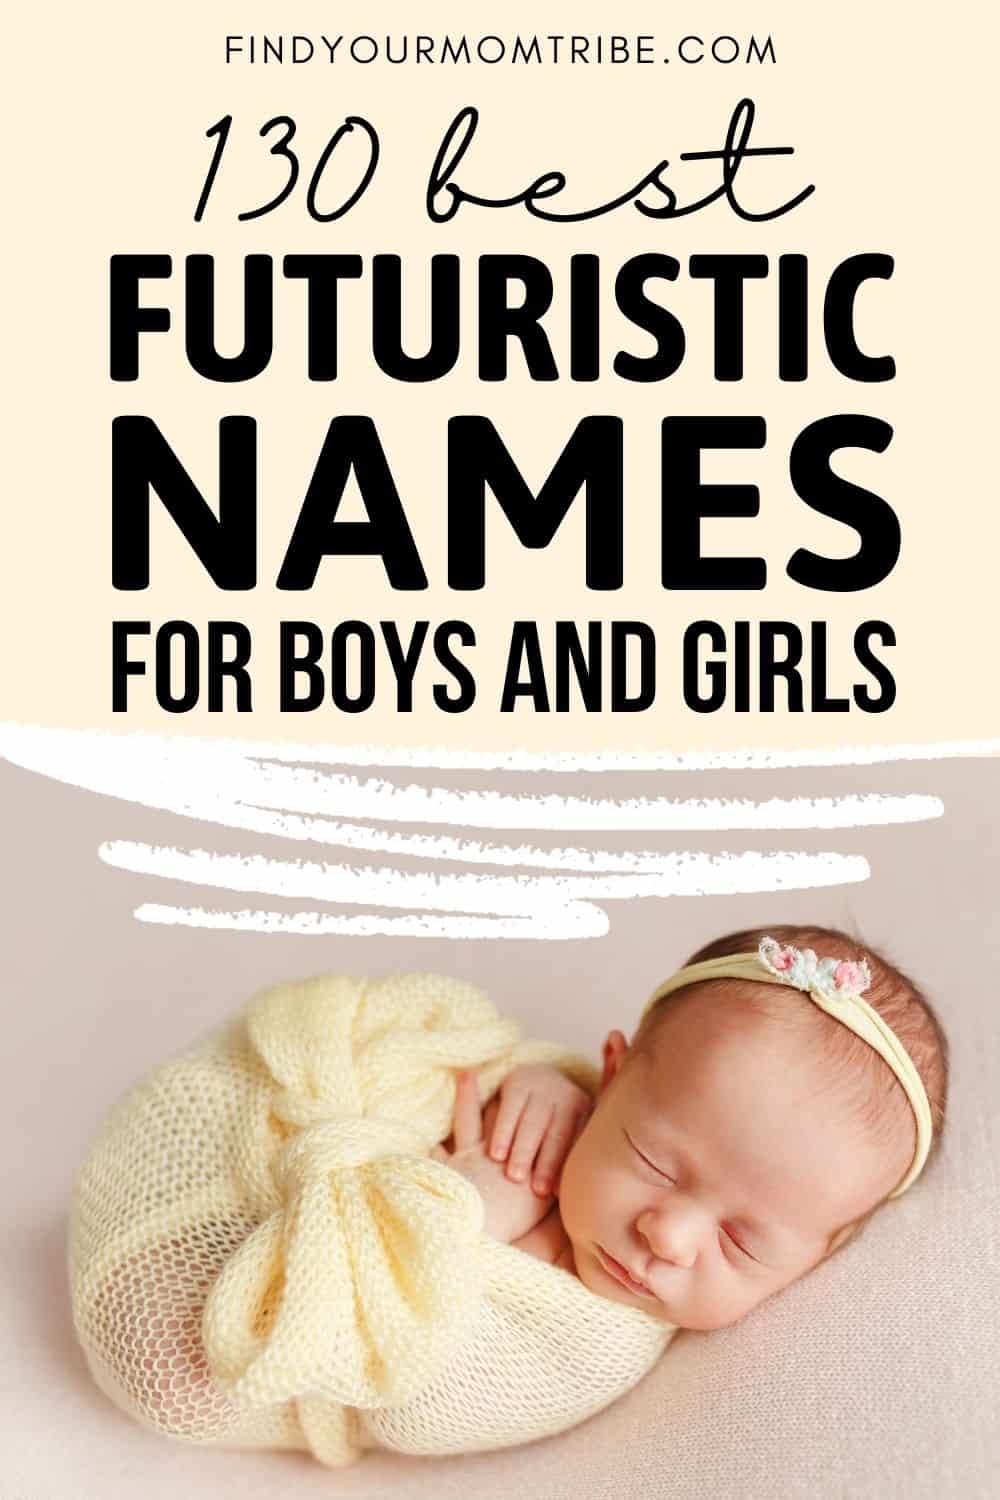 130 Best Futuristic Names For Boys And Girls